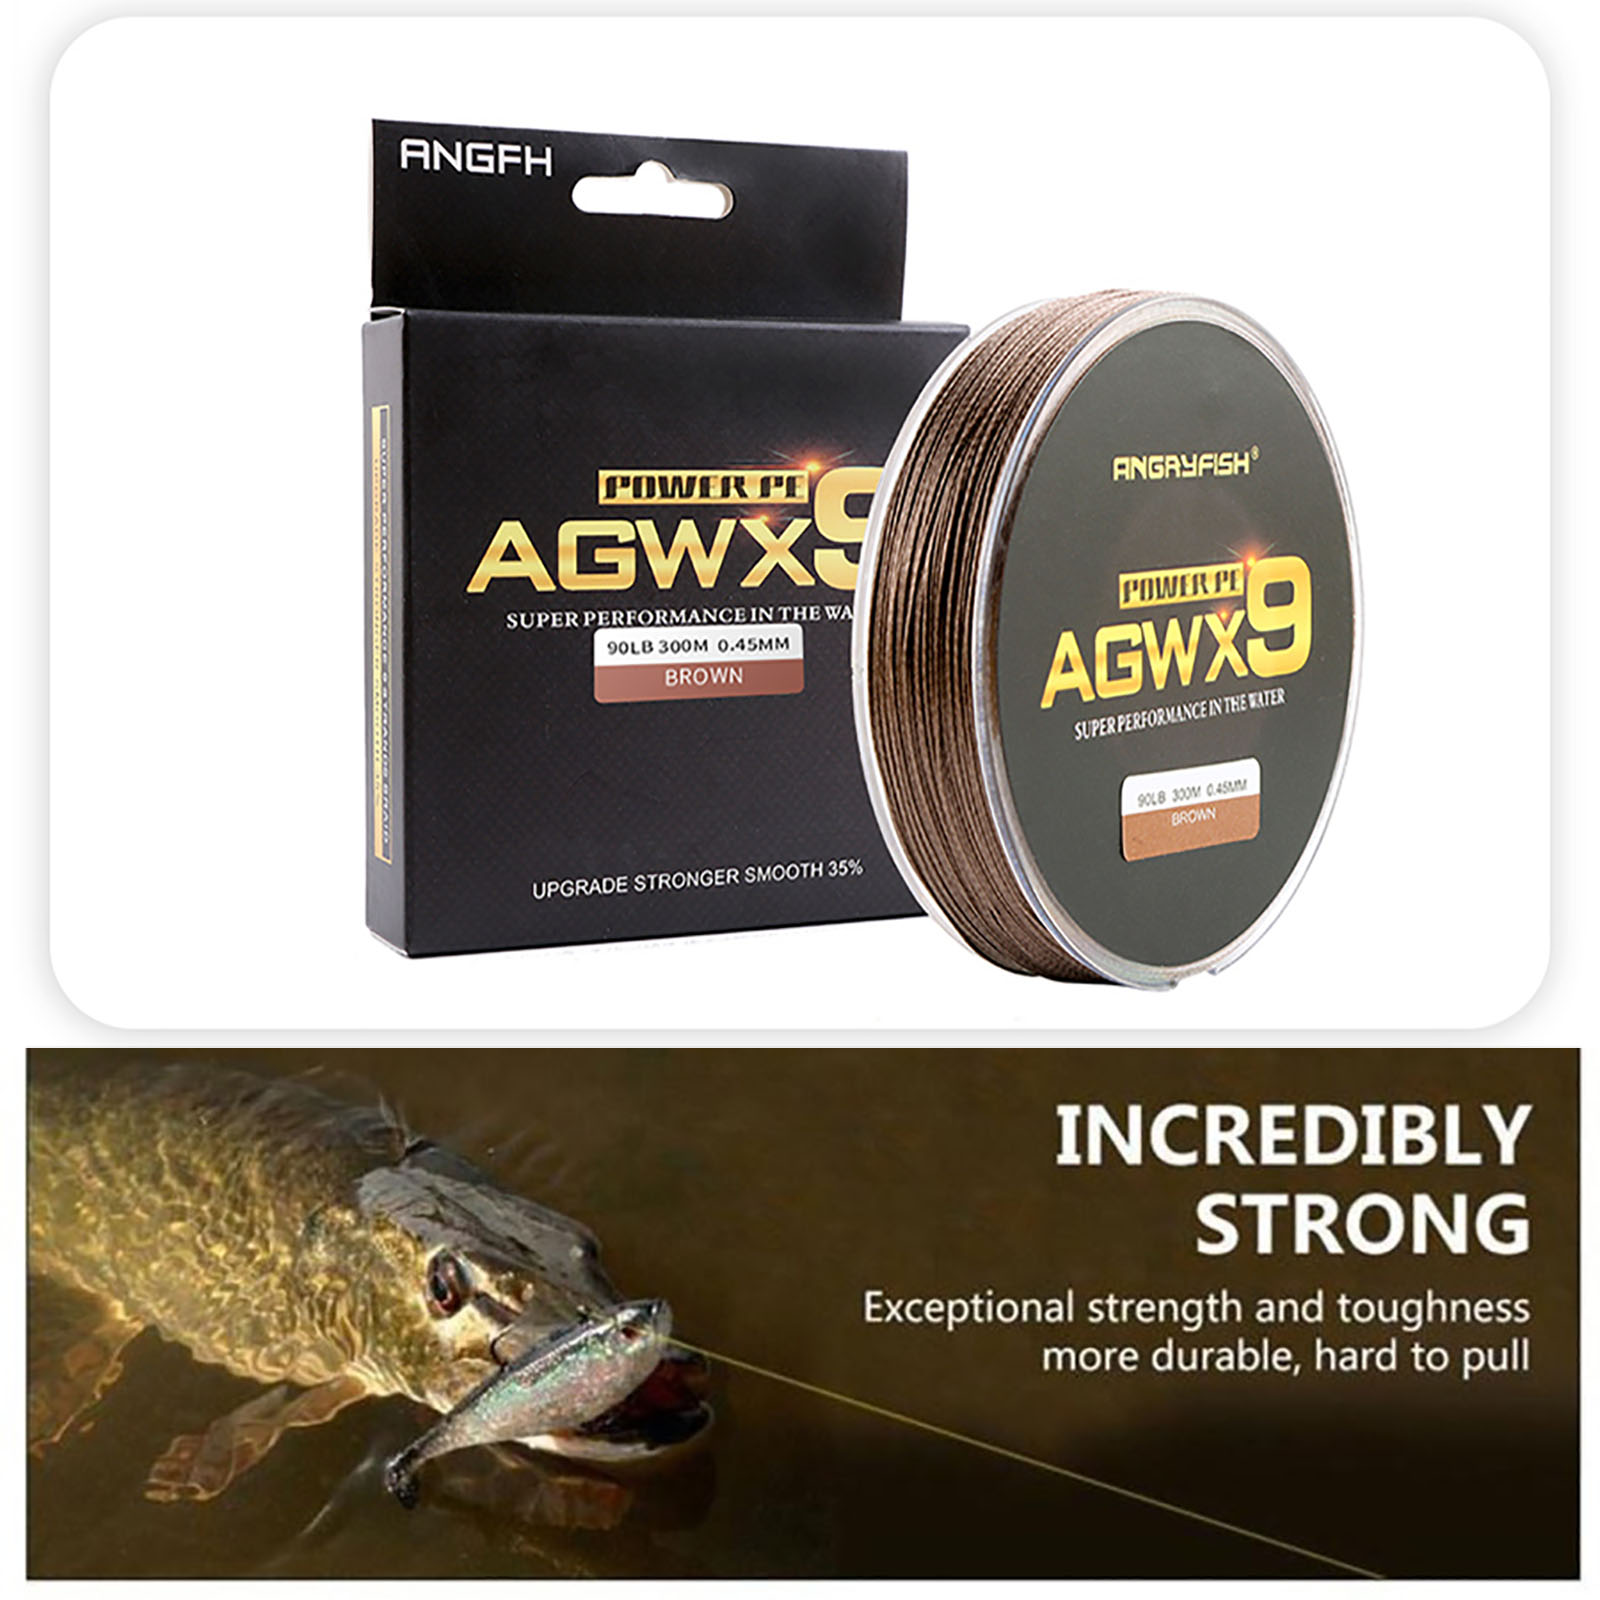  ANGRYFISH AGWX9 Braided Fishing Line-Strong Knot